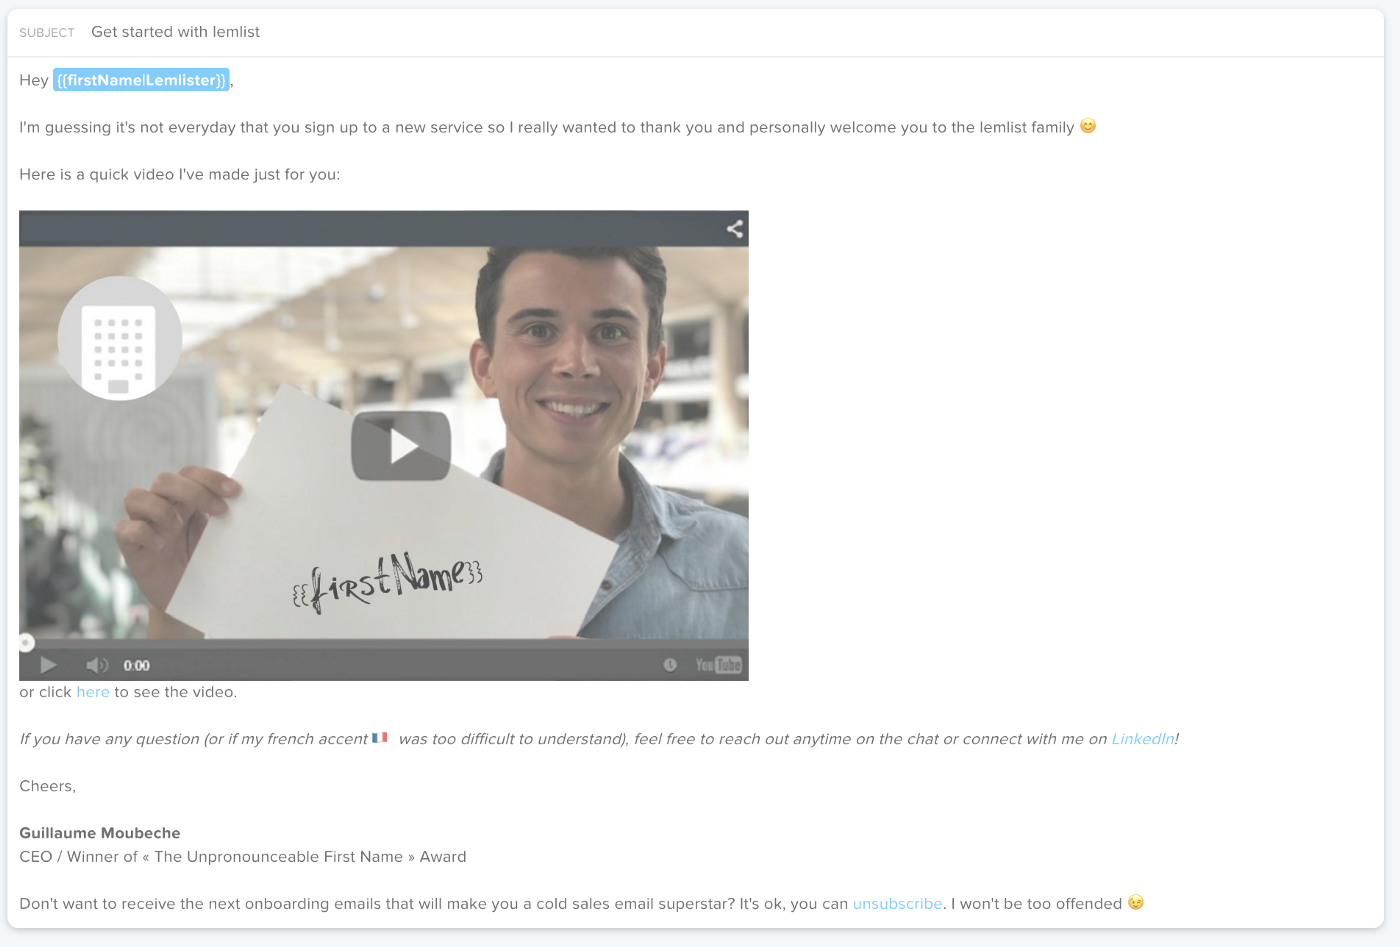 Example of onboarding sequence including videos and personalized images